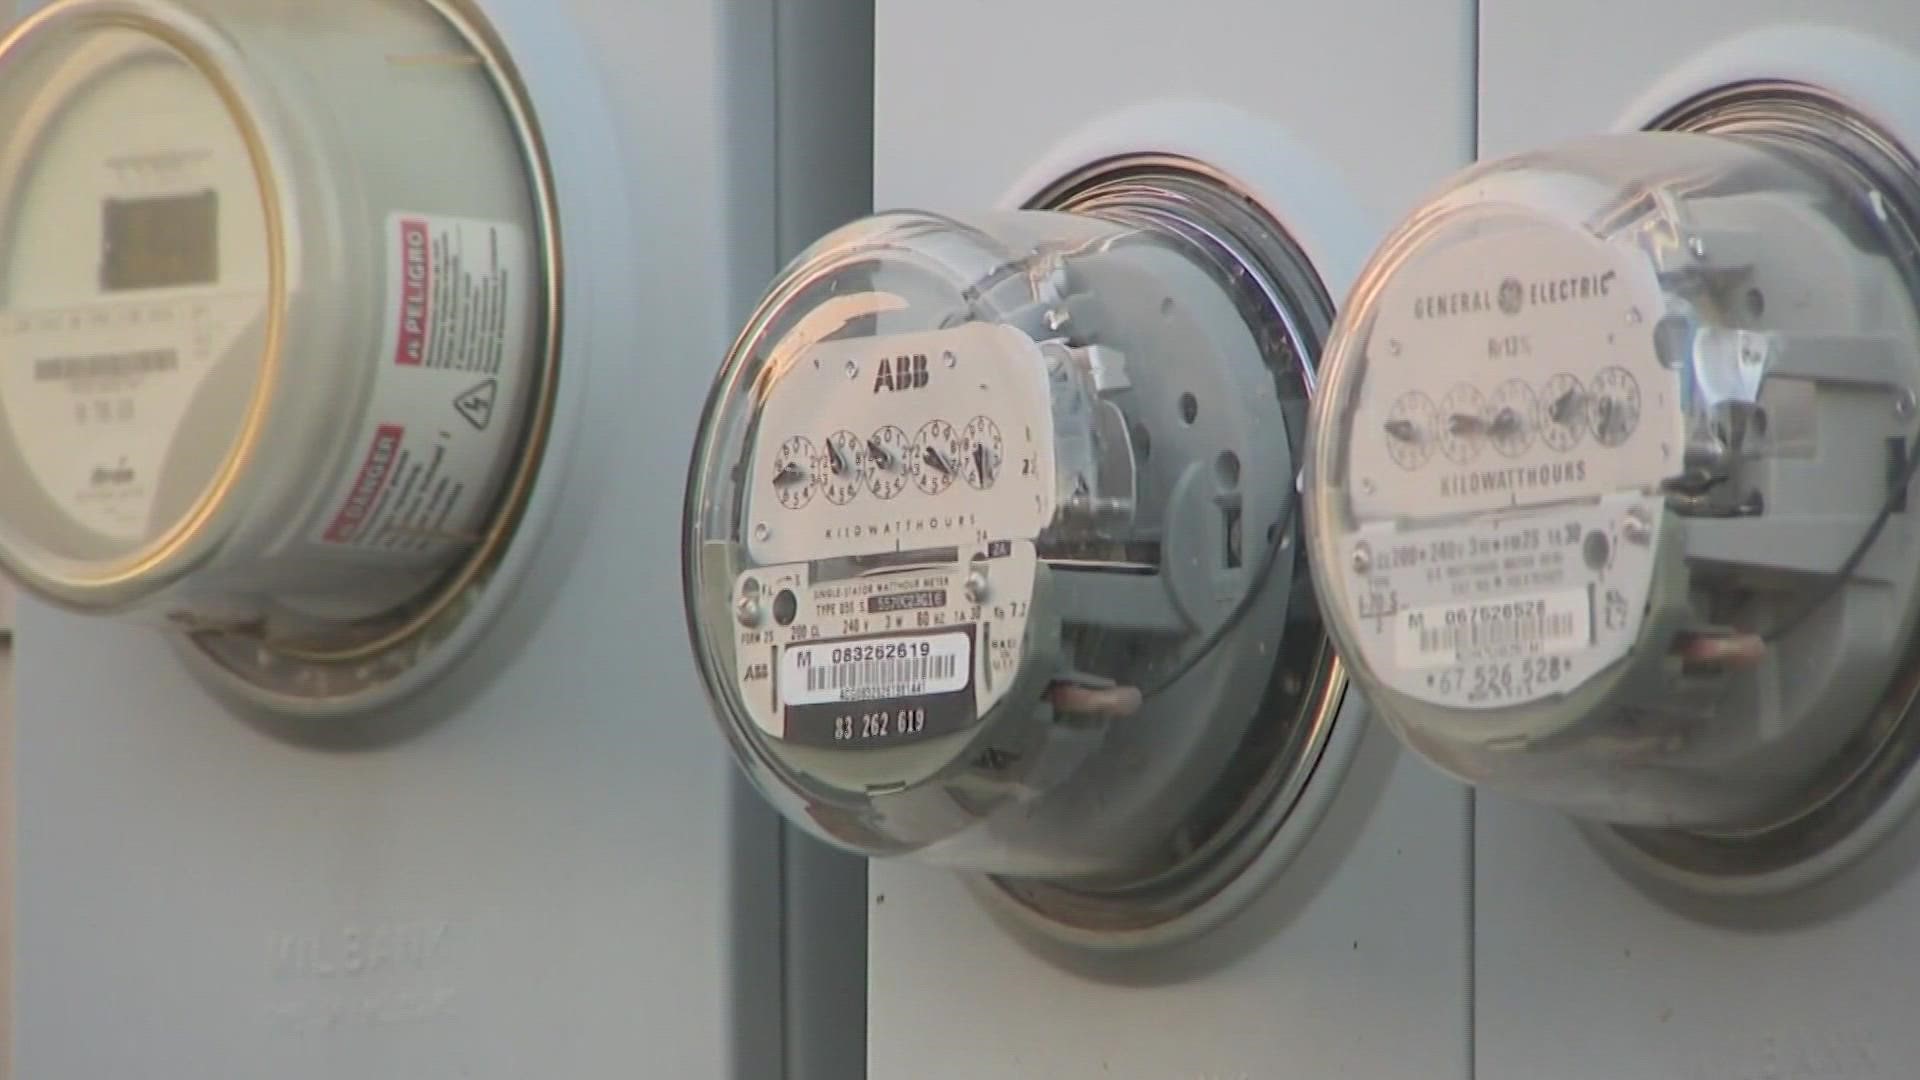 As the winter months approach, experts say the cost of heating homes is expected to dramatically increase.